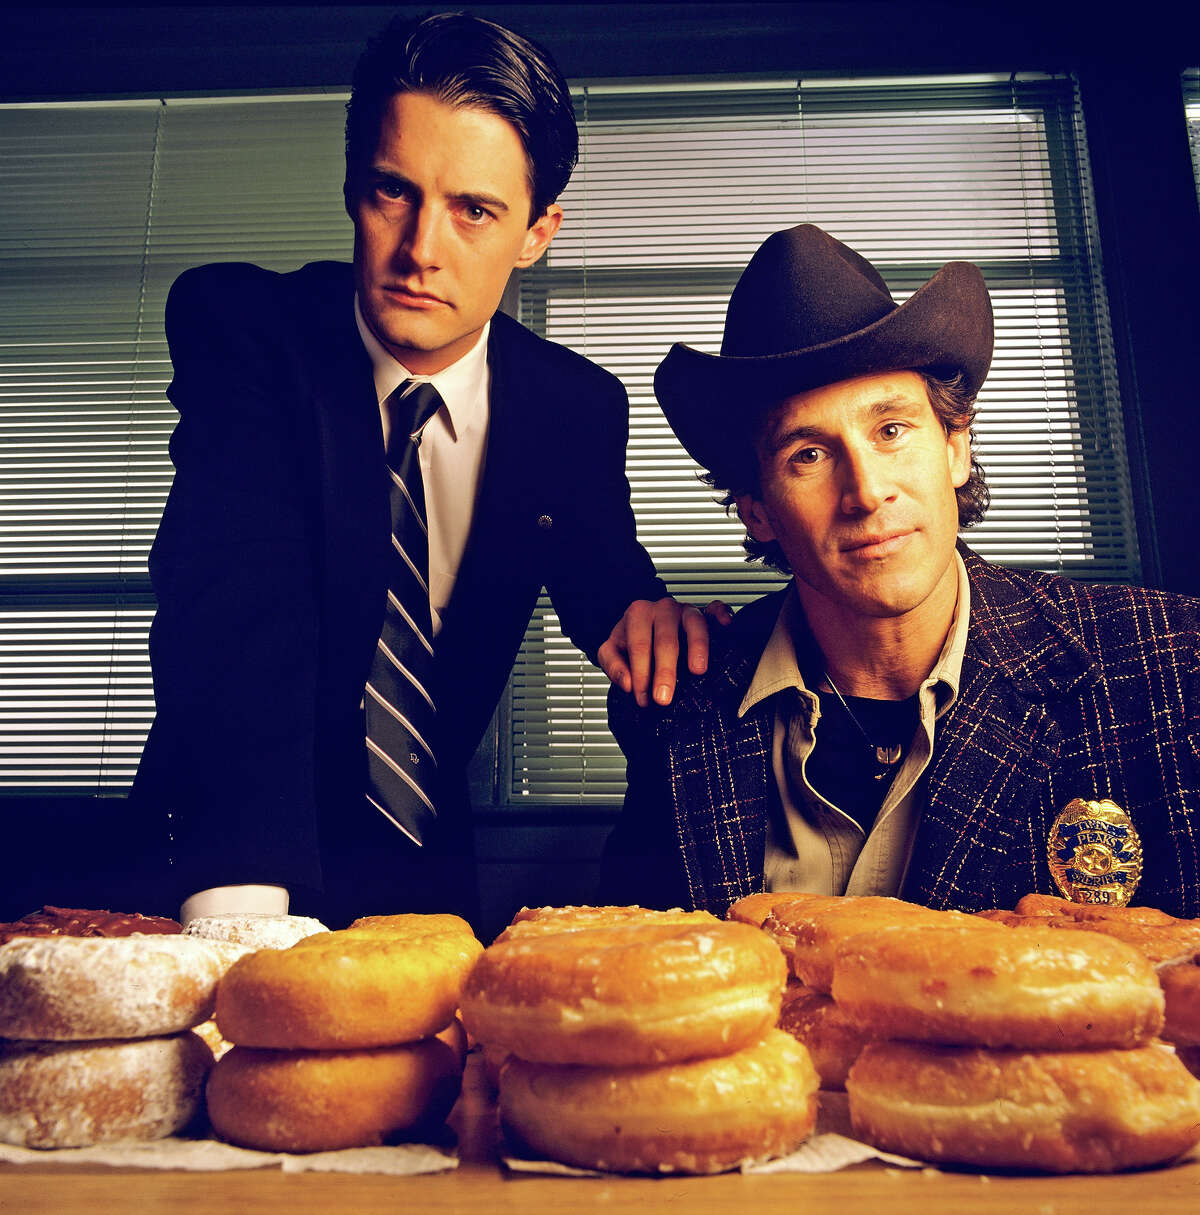 "Twin Peaks" featured Kyle MacLachlan, left, as FBI Special Agent Dale Cooper, who arrives in a small, Northwest town to help Sheriff Truman (Michael Ontkean, right) investigate the murder of homecoming queen Laura Palmer. Photo: 1989. 